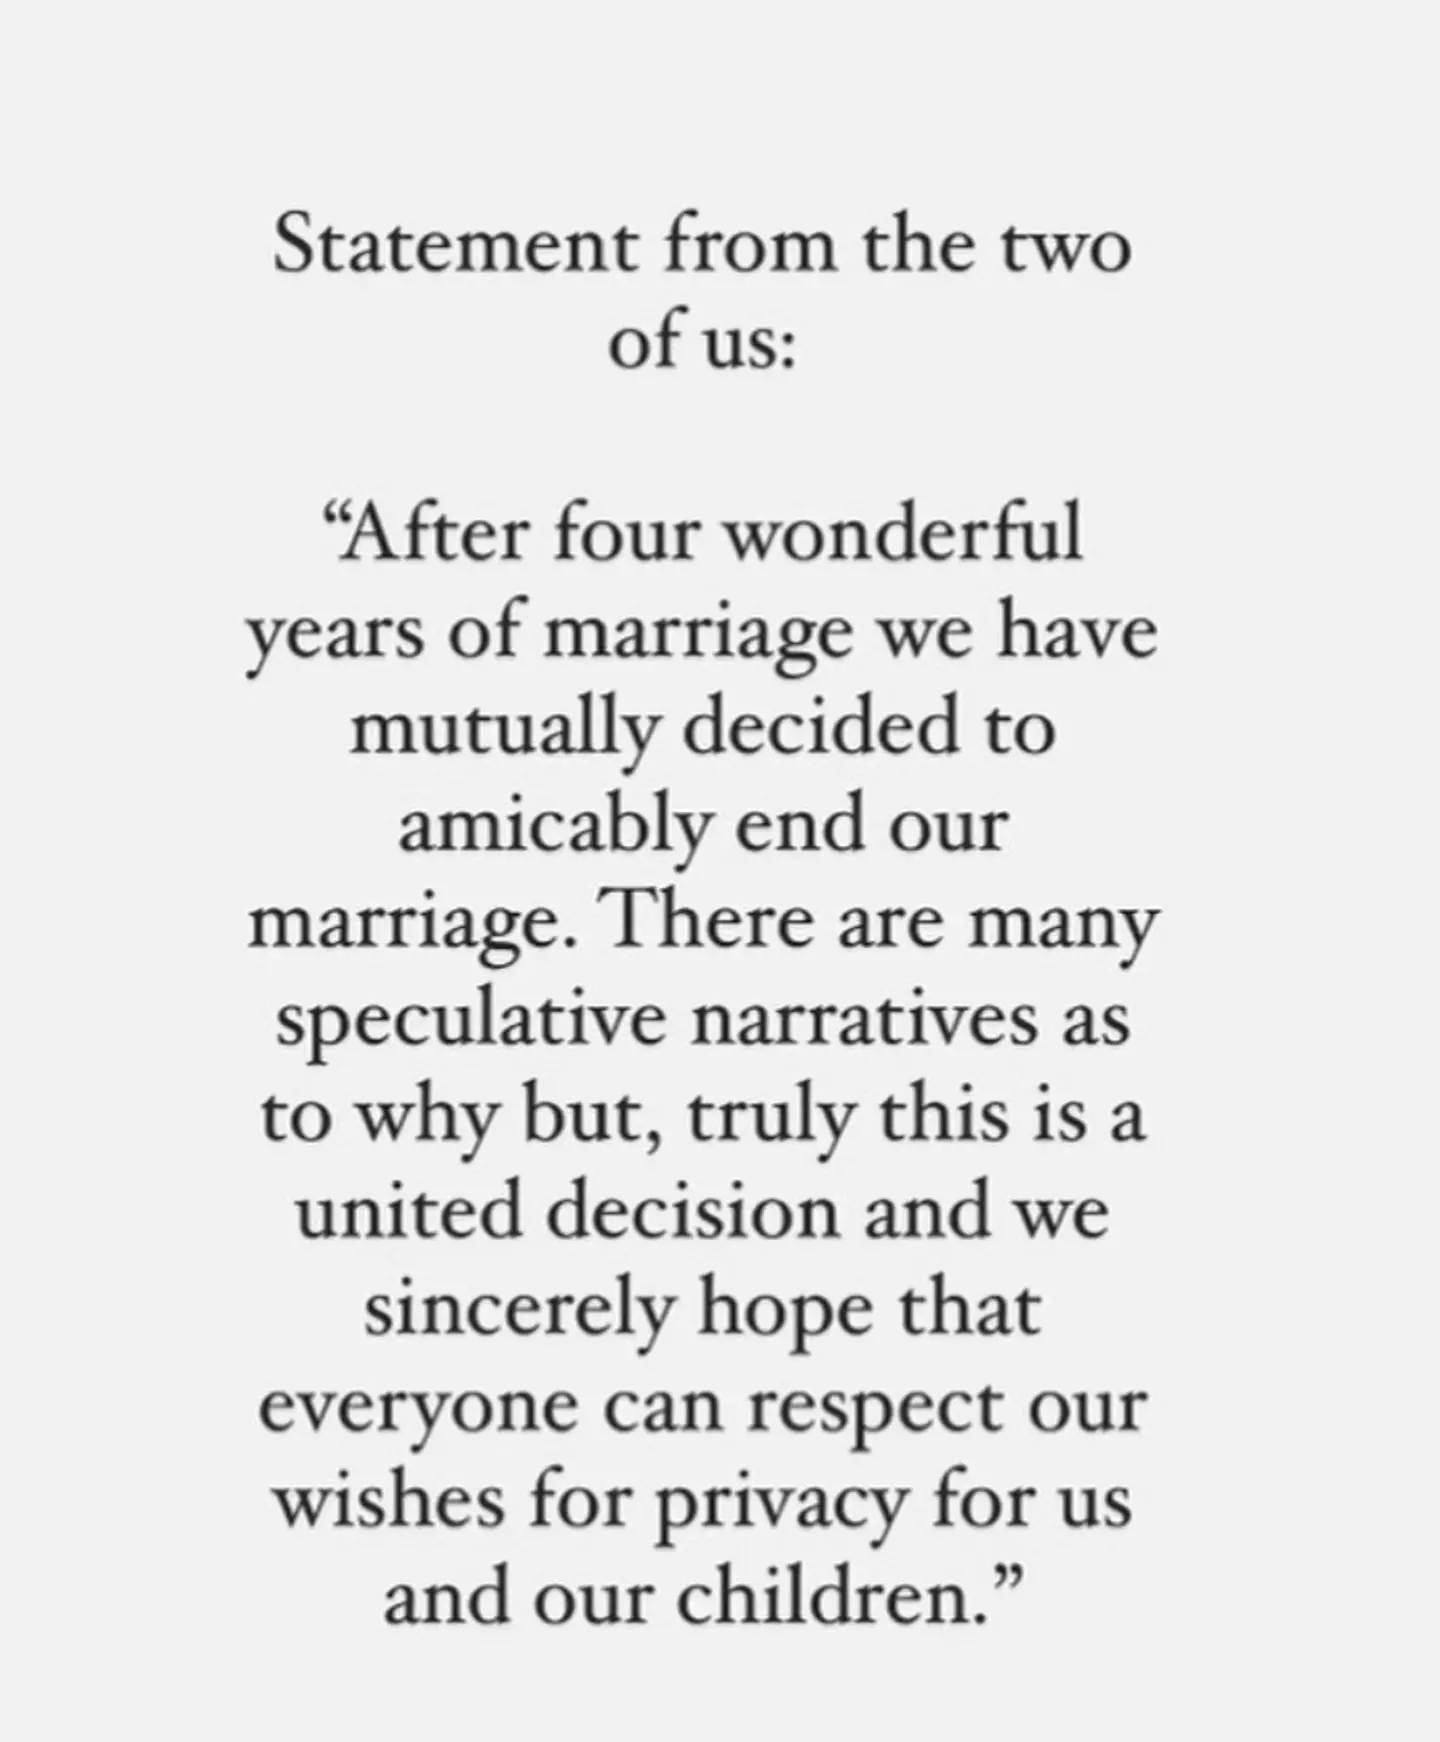 Jonas and Turner coordinated to write a joint statement, announcing their marriage was over.